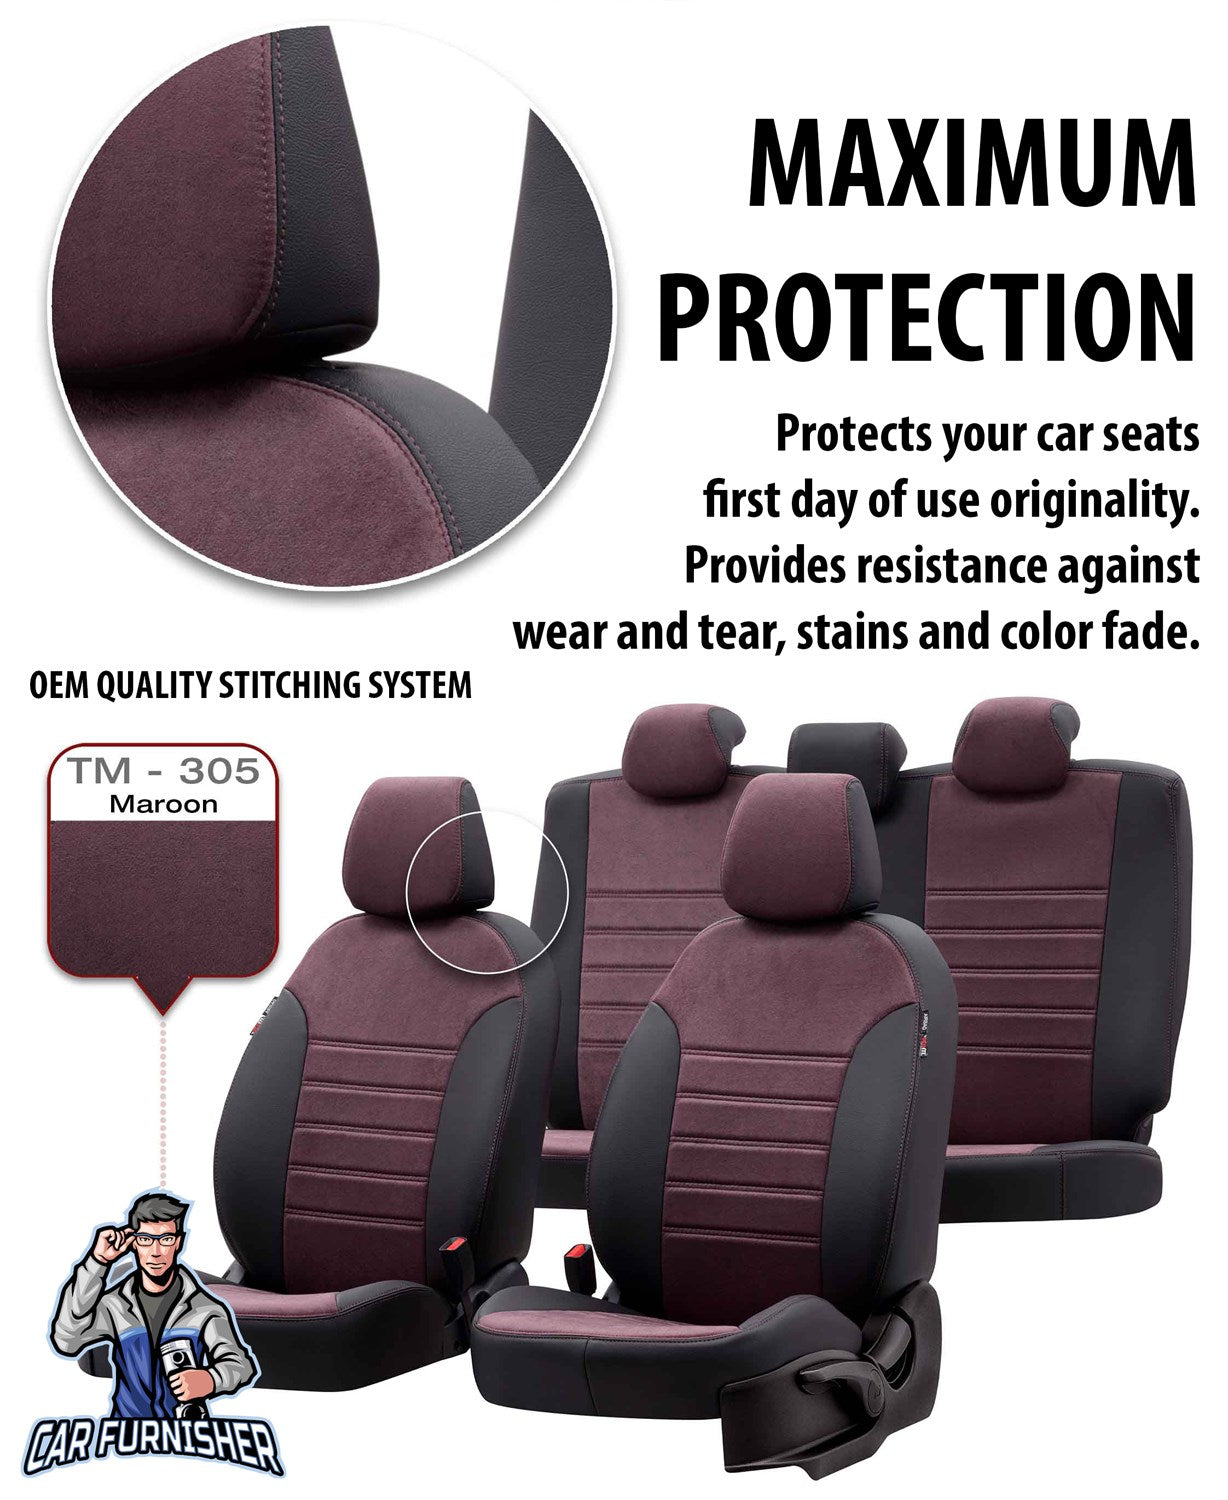 Kia Picanto Seat Covers Milano Suede Design Burgundy Leather & Suede Fabric